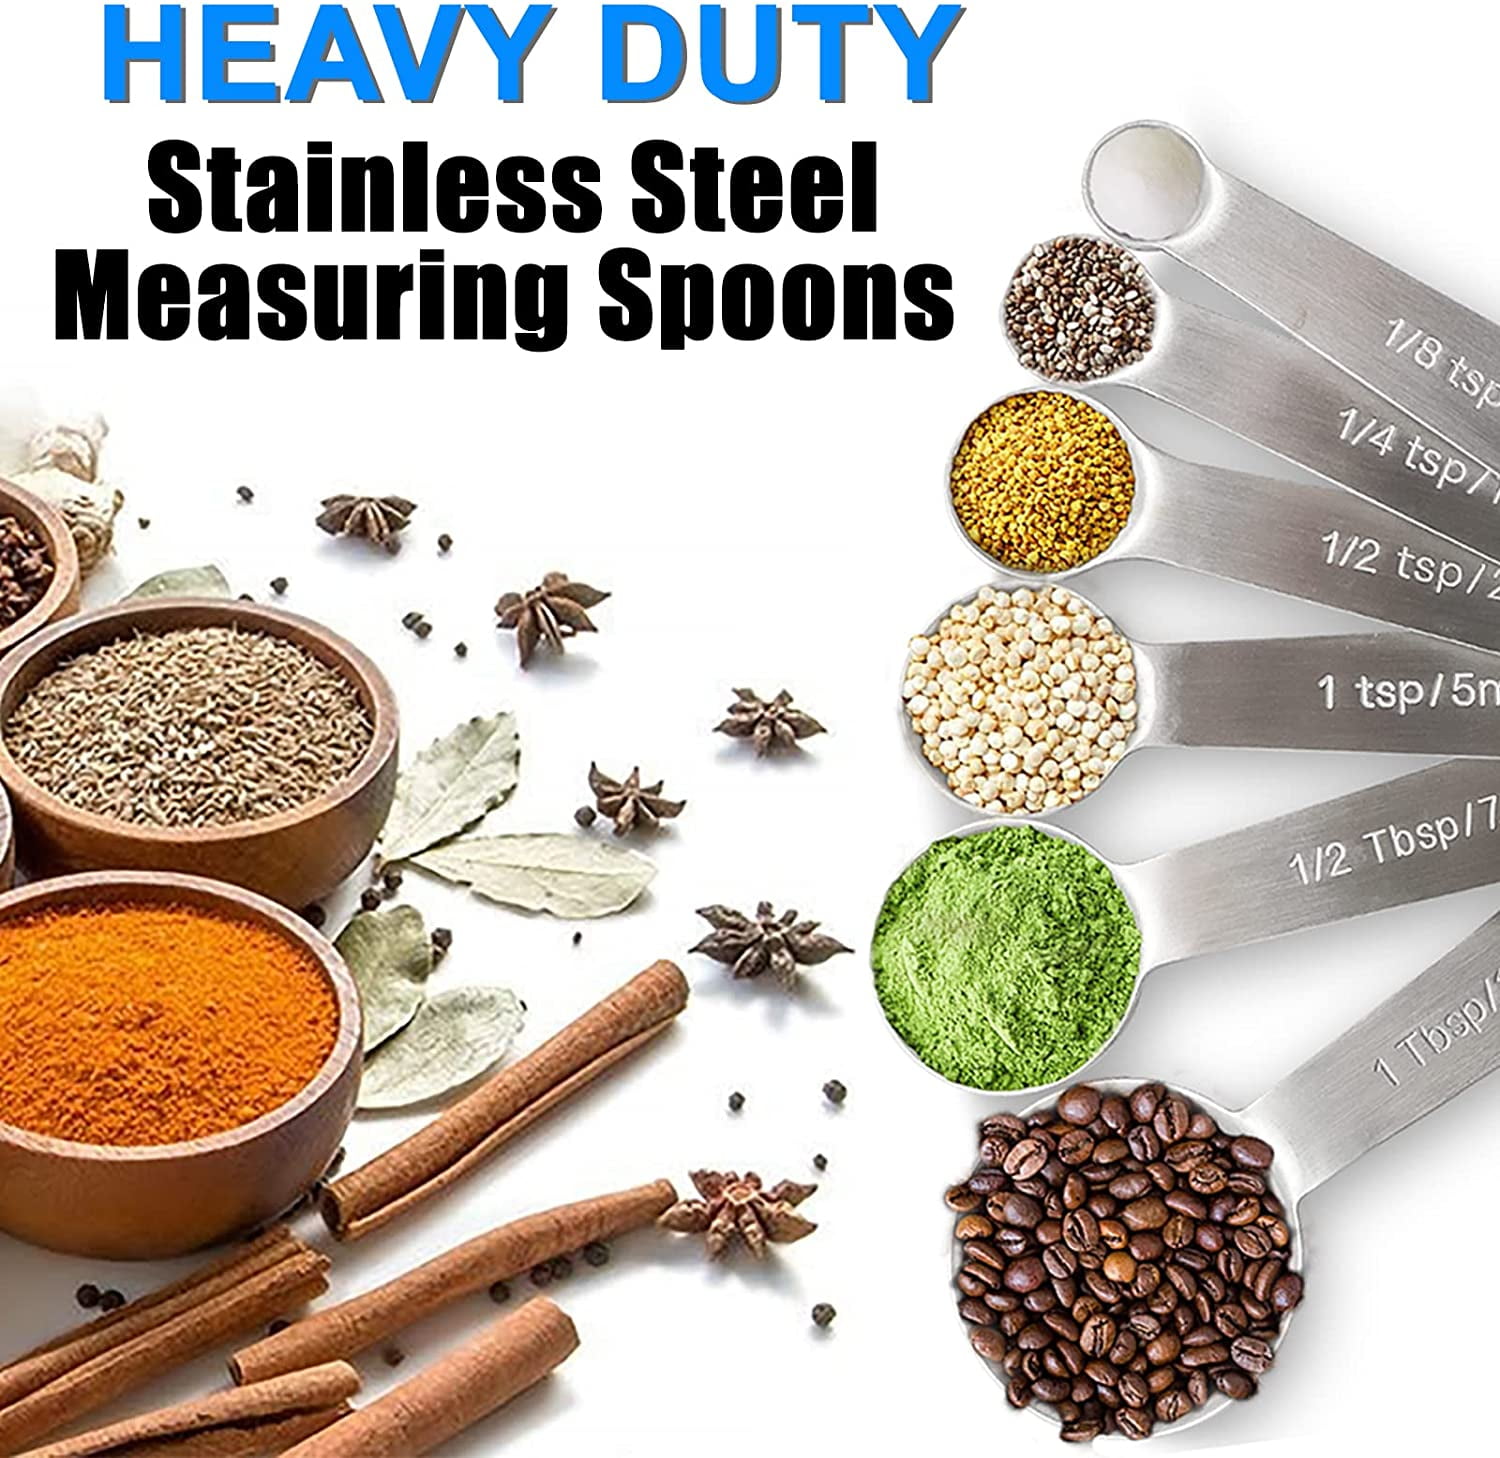 Smithcraft Measuring Spoons Set, 18/8 Stainless Steel Measuring Spoon Set 9  & Leveler, Metal Measuring Spoons for Baking, Kitchen Gadgets Measure